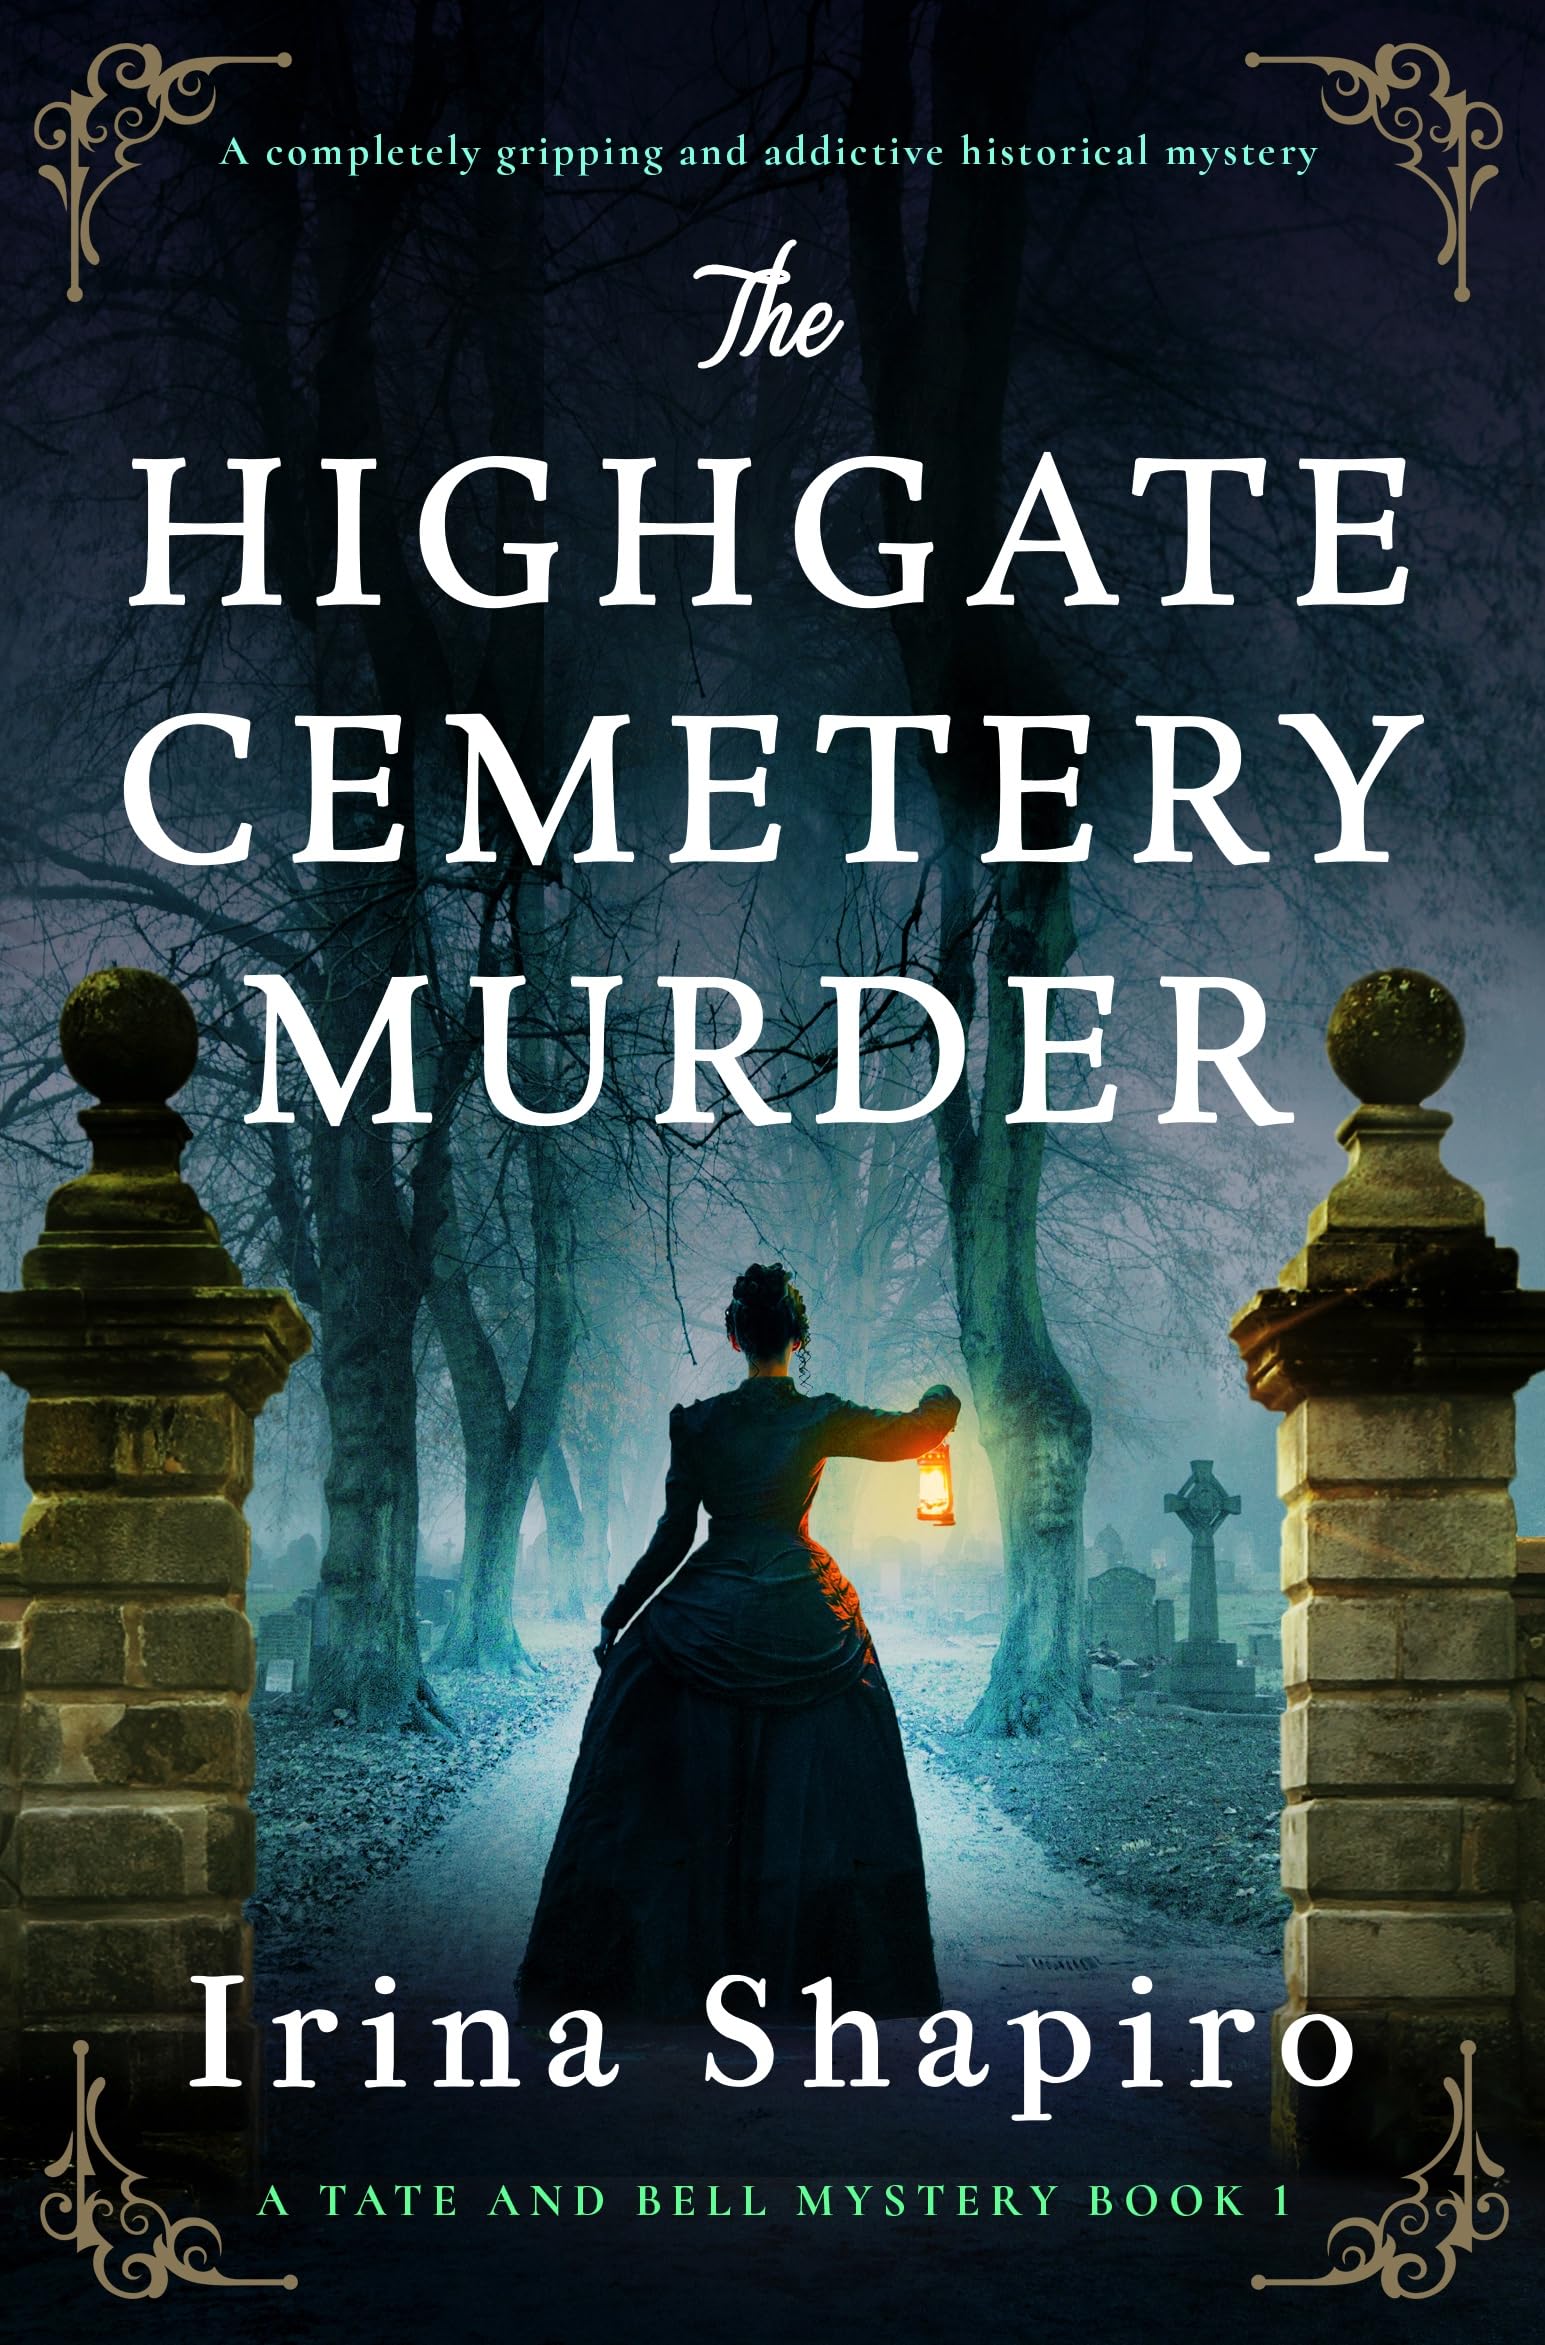 The Highgate Cemetery Murder: A completely gripping and addictive historical mystery (A Tate and Bell Mystery Book 1)